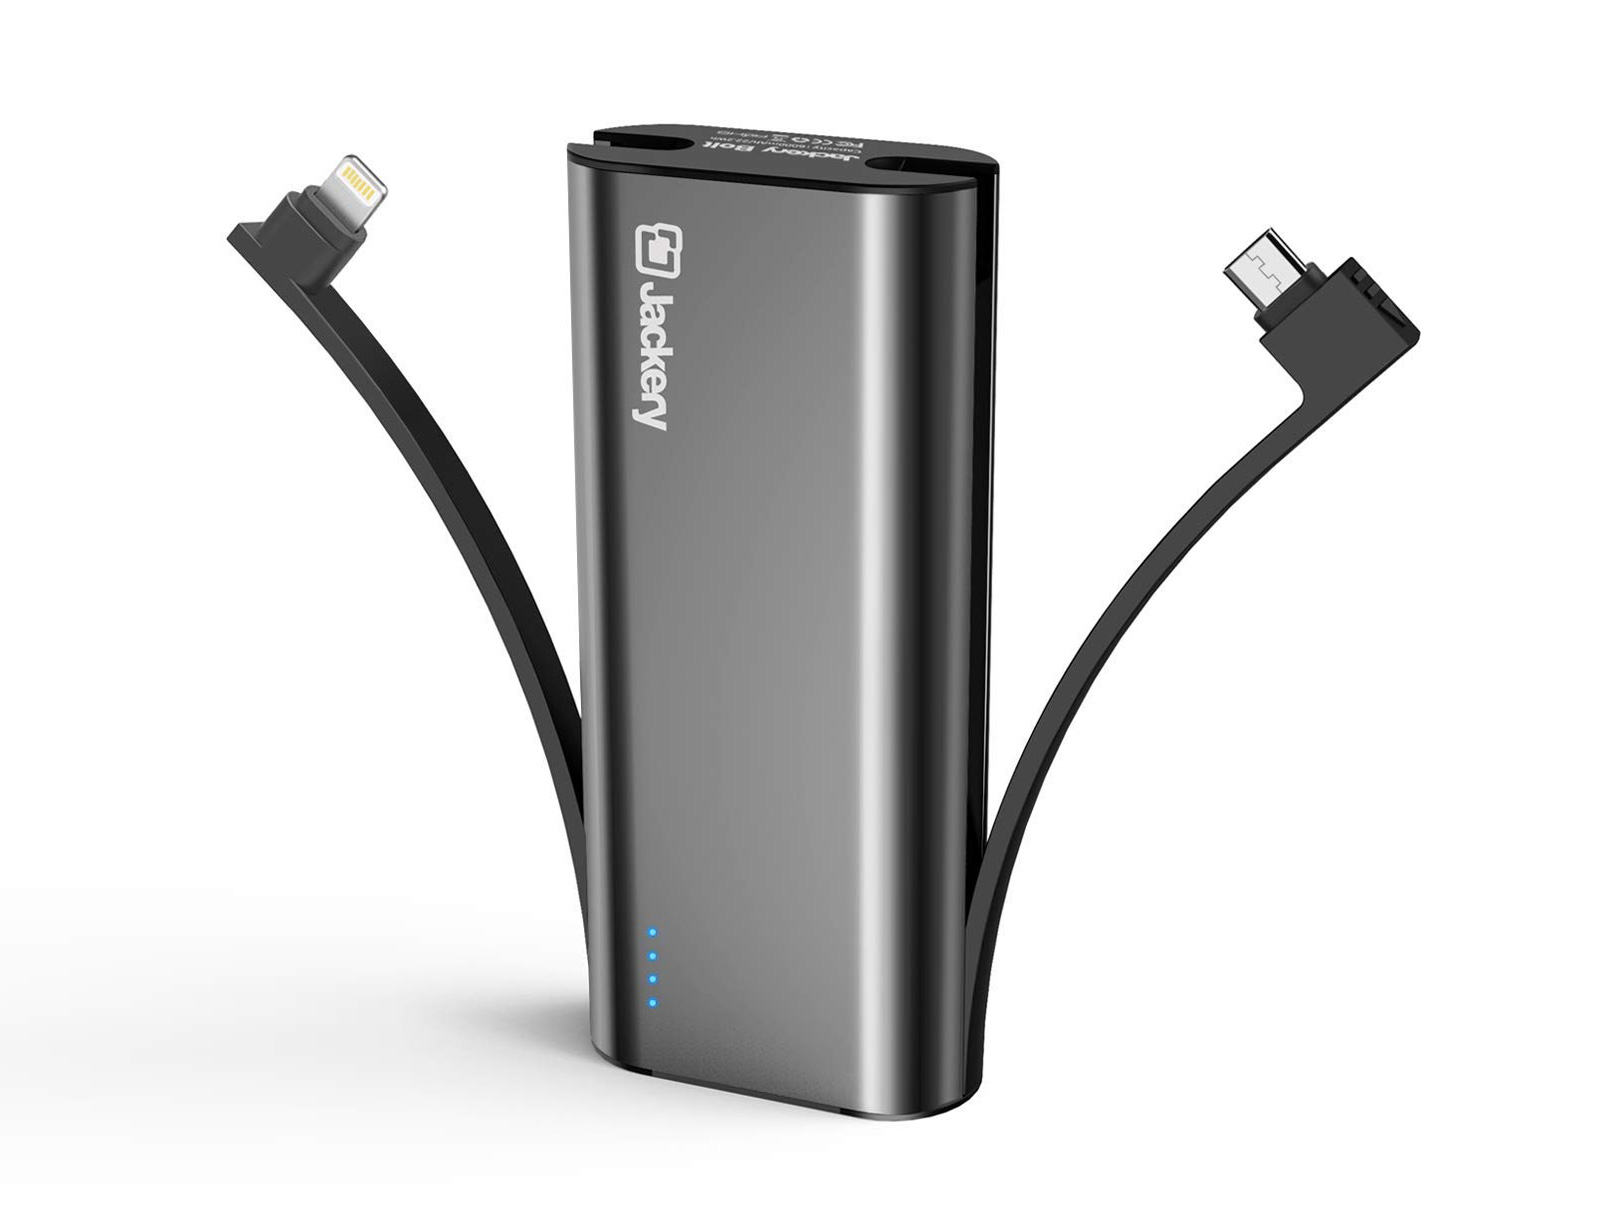 The best portable charger you can buy, which charges an iPhone twice as